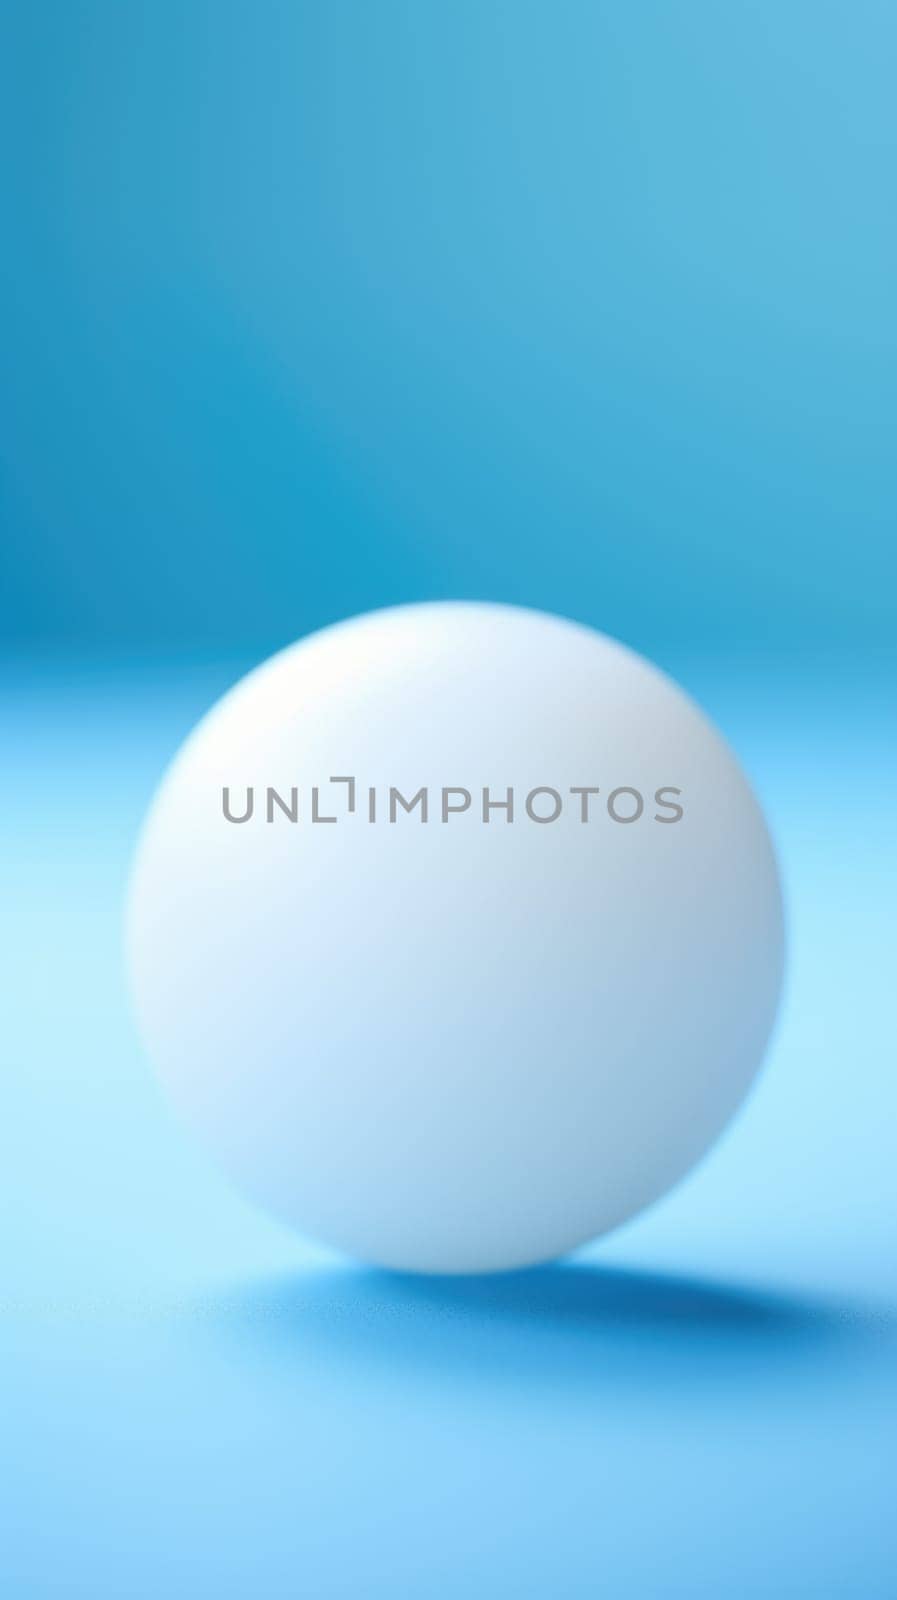 An egg on a blue background